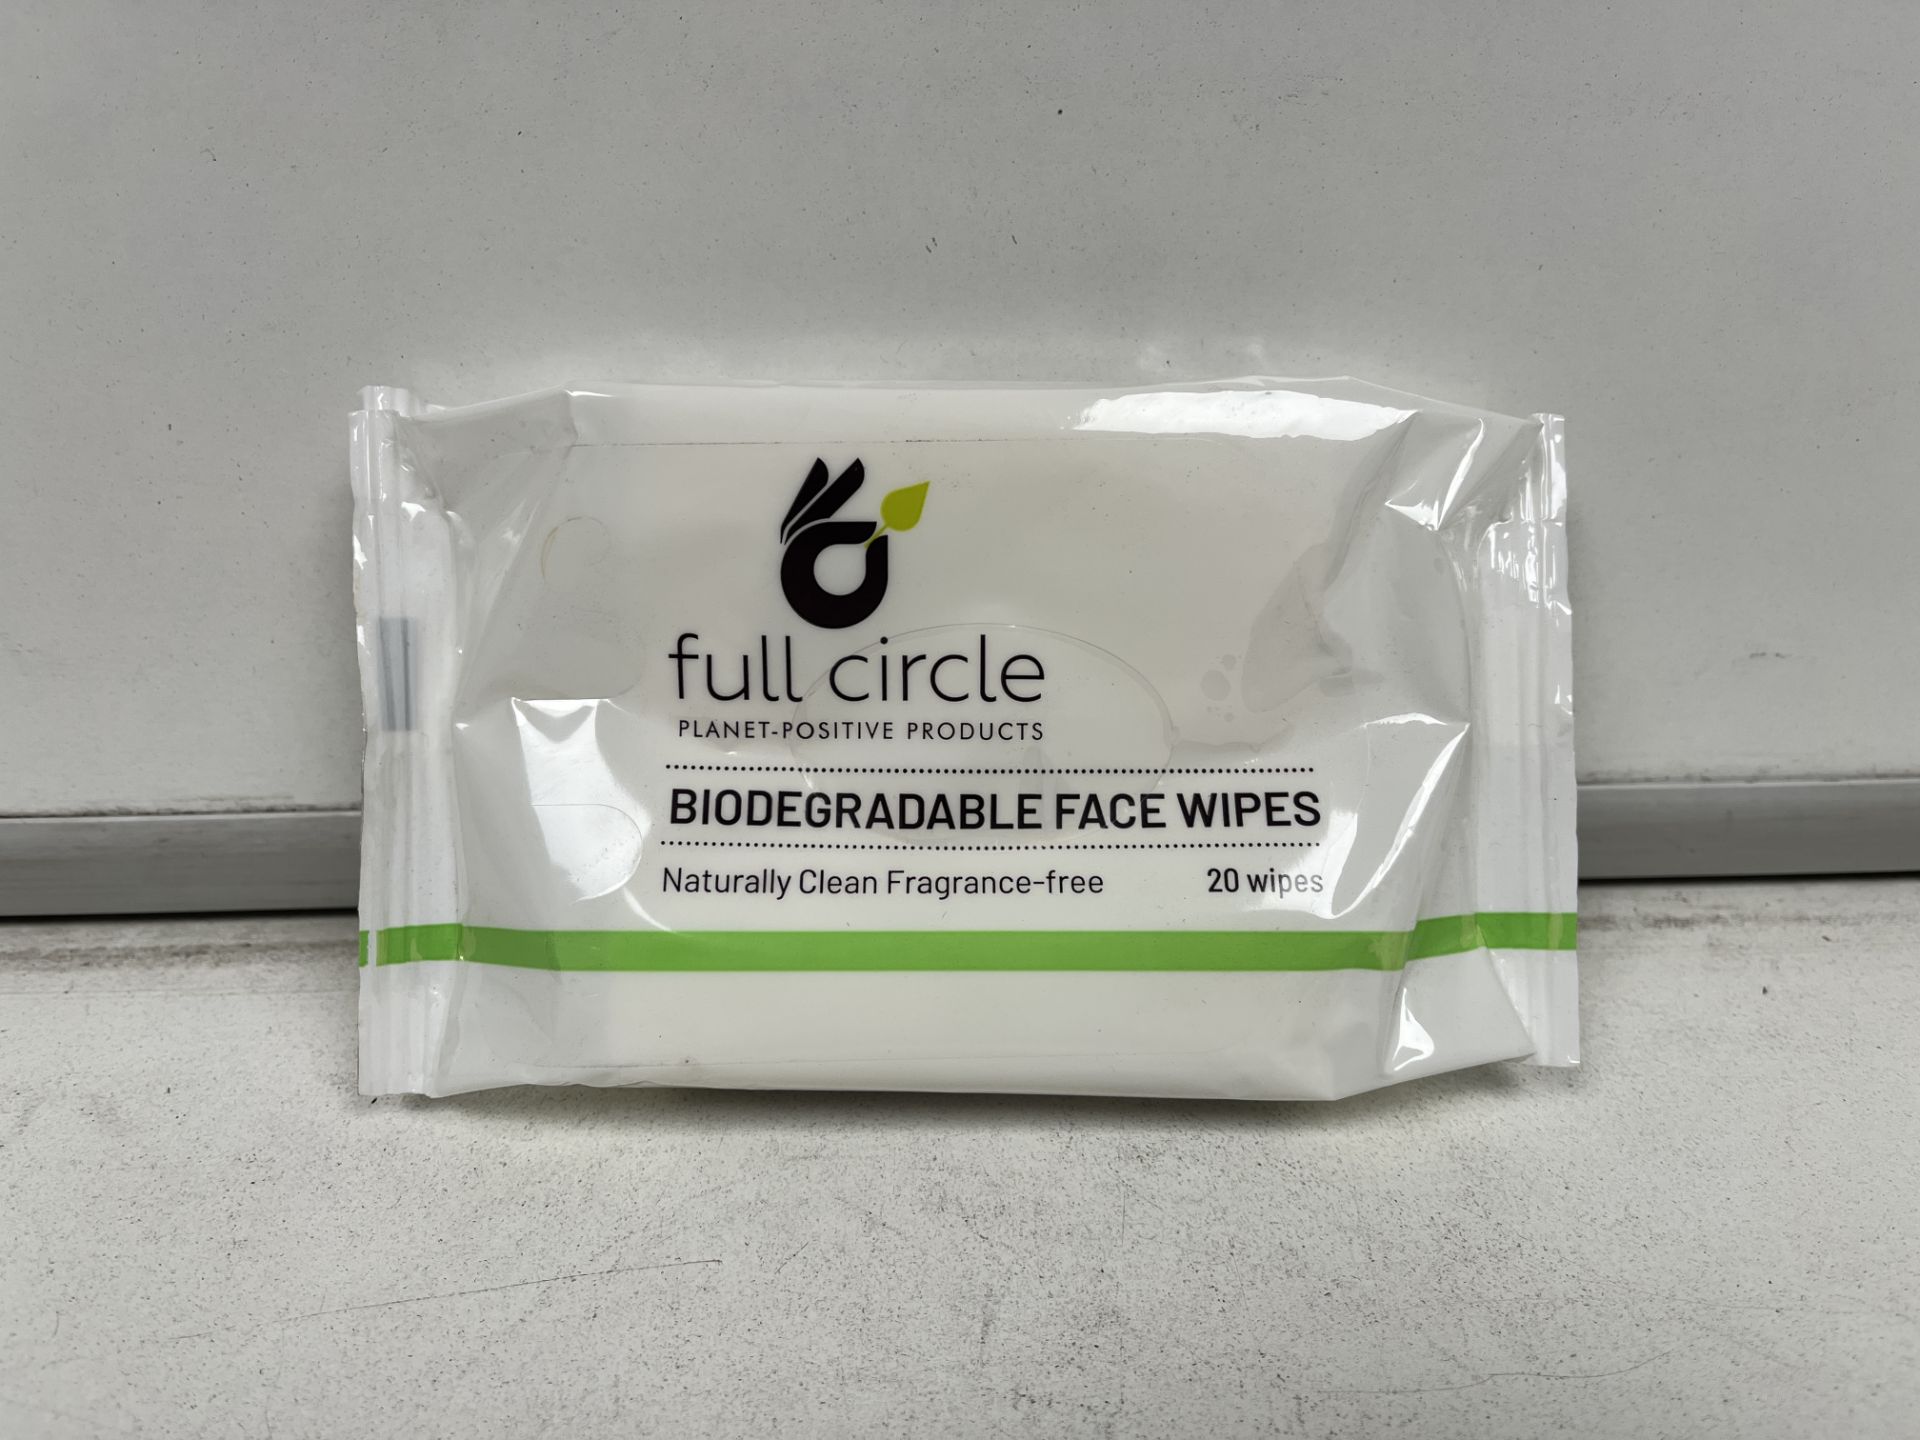 144 X BRAND NEW PACKS OF 20 FULL CIRCLE BIODEGRADEABLE FACE WIPES R4-7